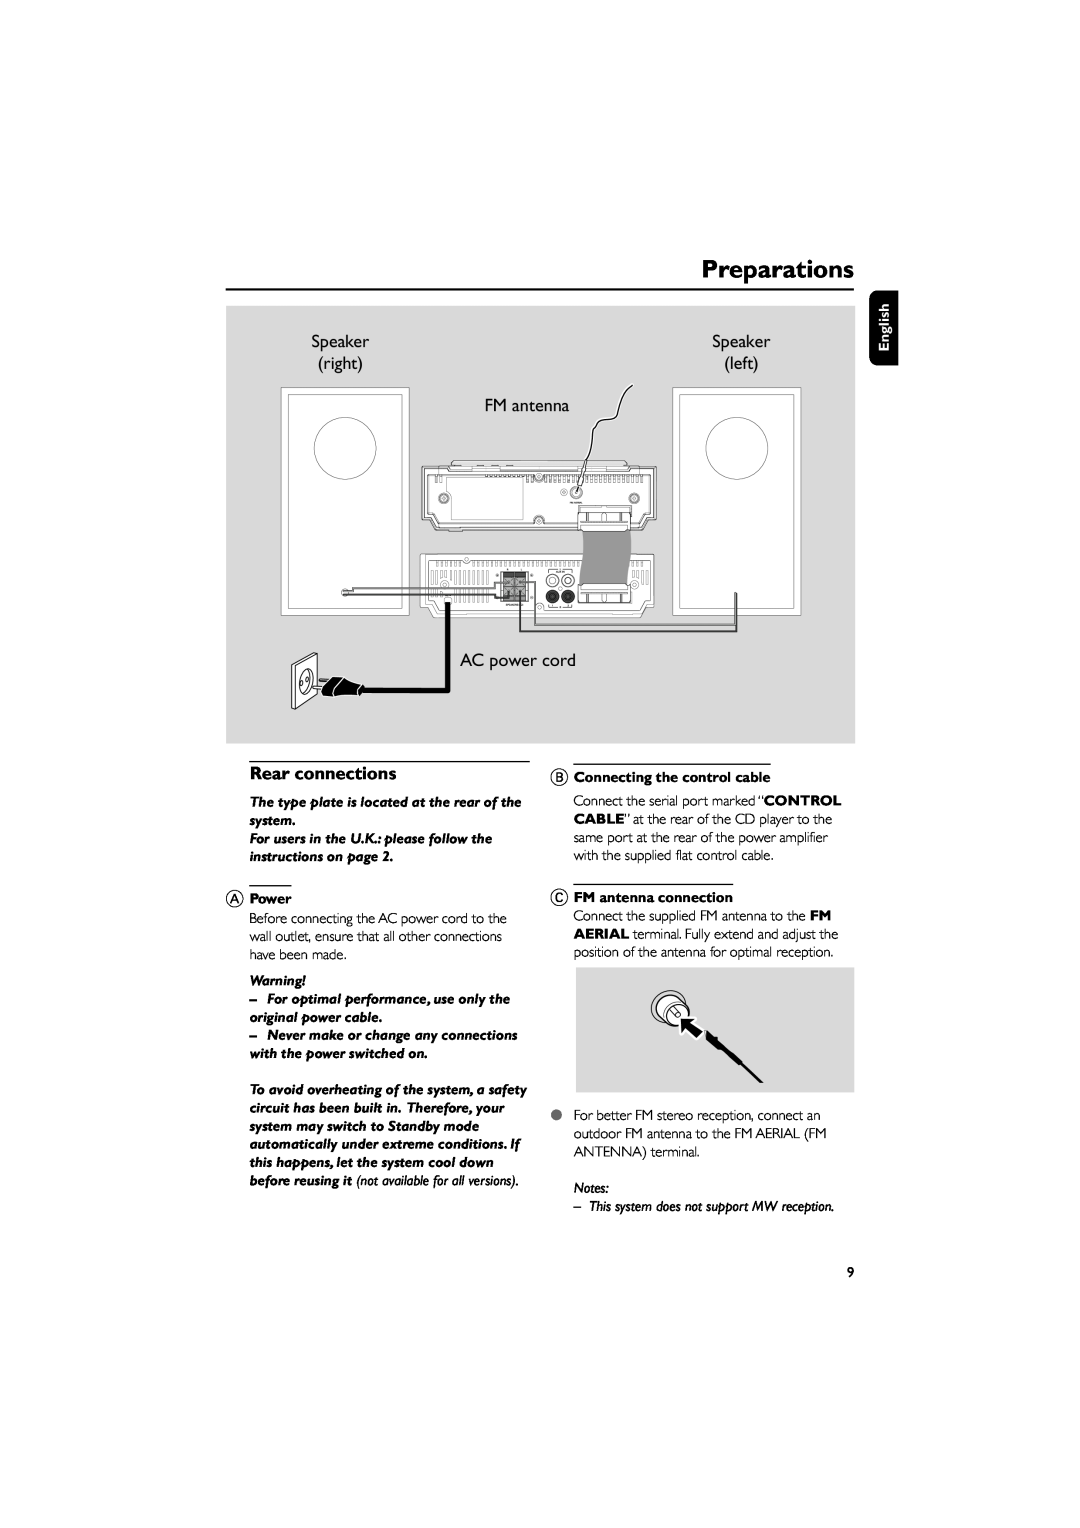 Philips MCM700 user manual Preparations, right, left, FM antenna, AC power cord, Rear connections, English, APower 